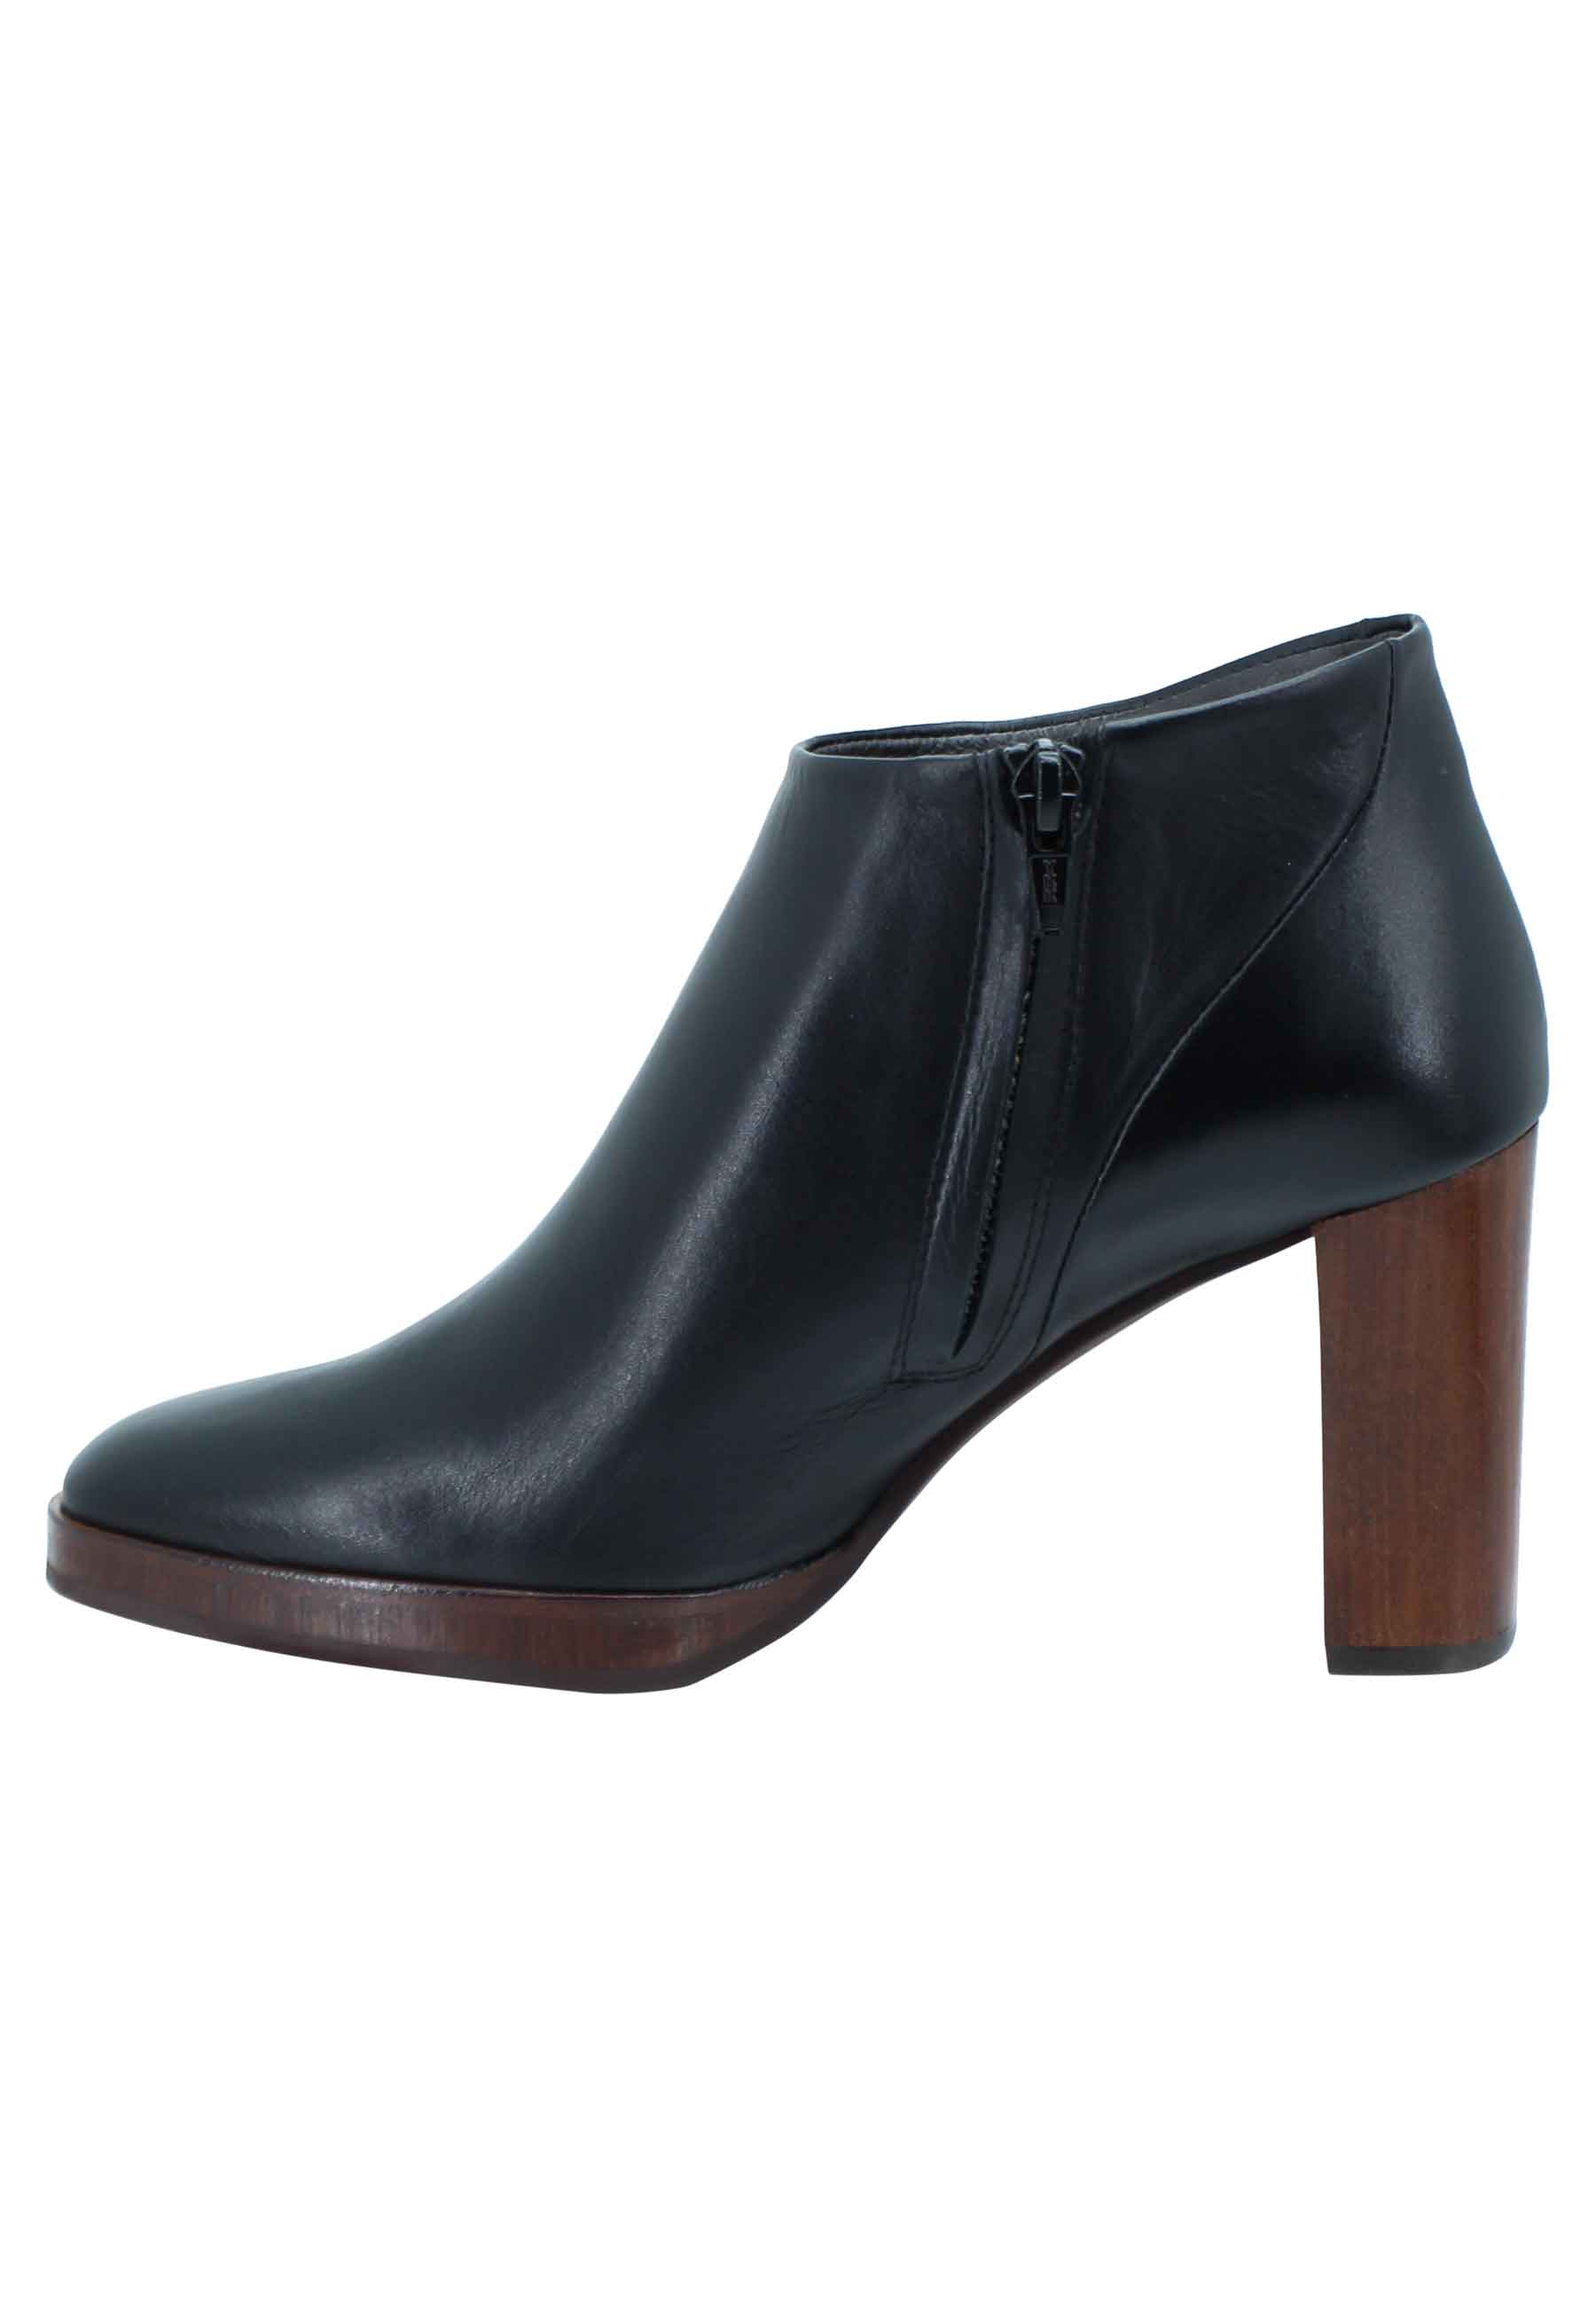 Women's ankle boots in black leather with high heel and platform